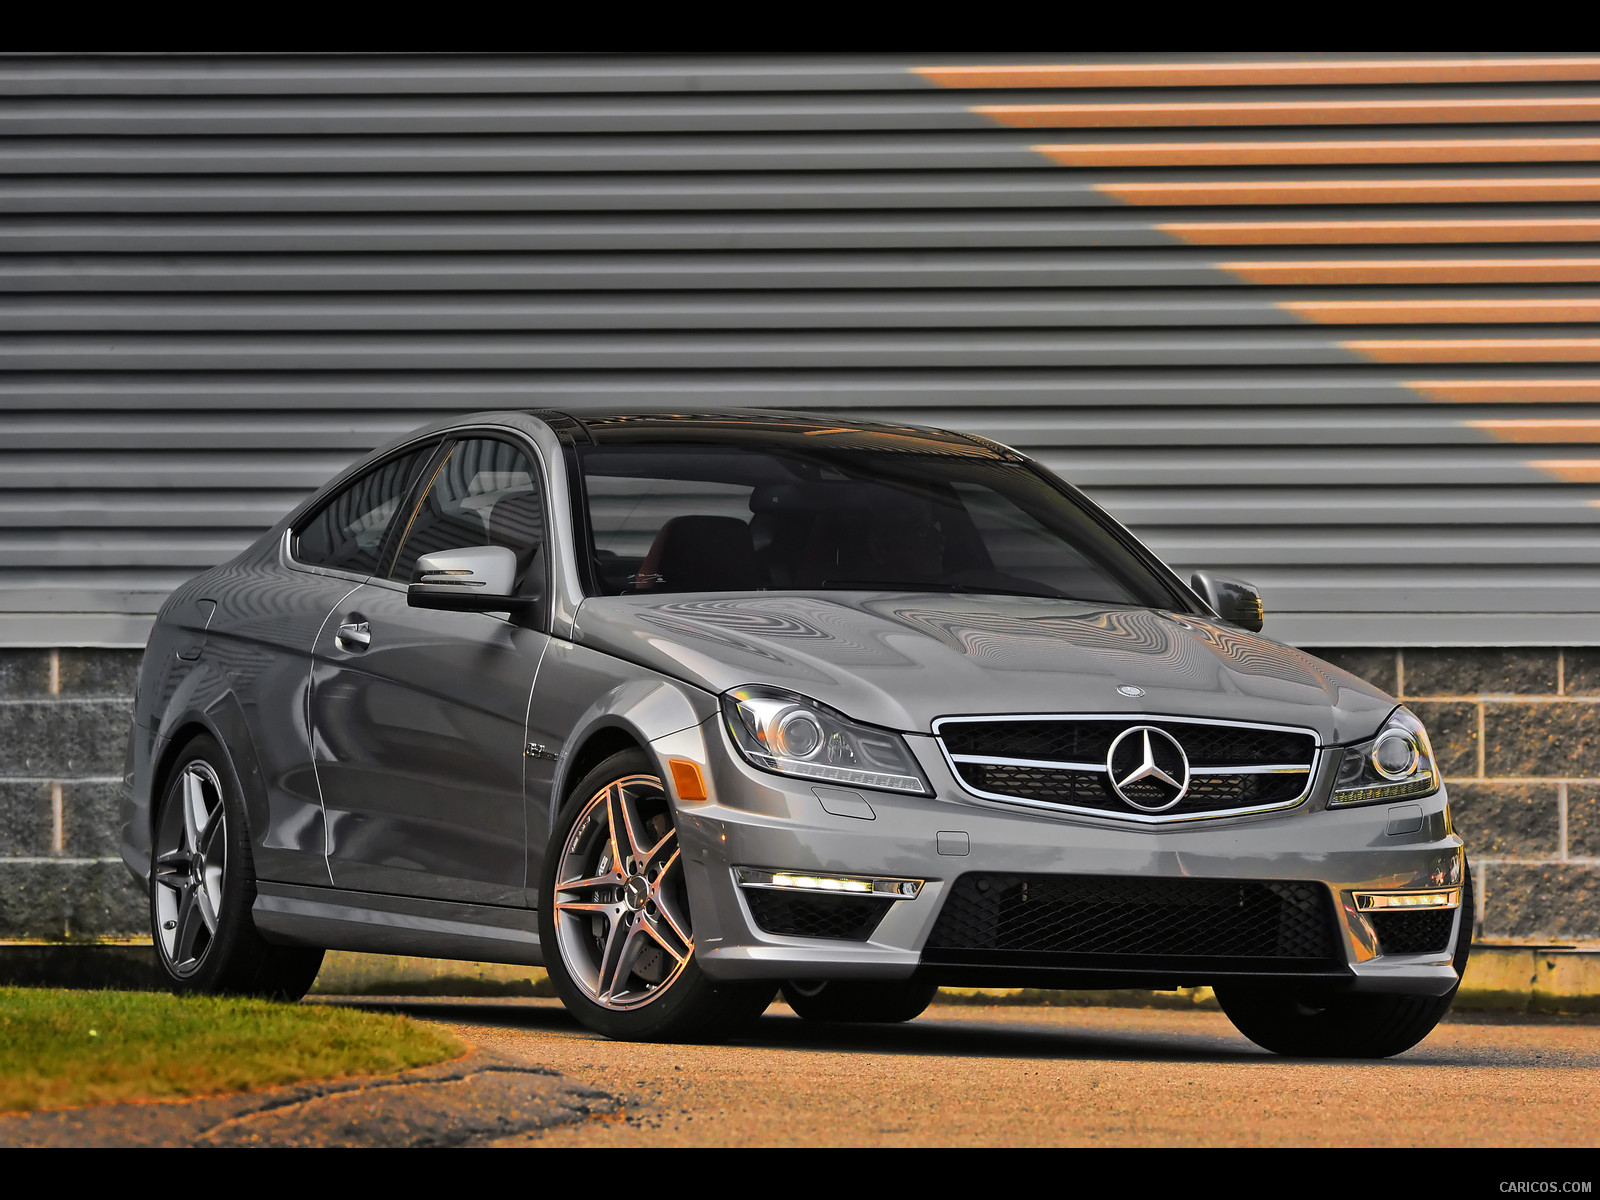 Mercedes-Benz C63 AMG Coupe (2012) with MCT transmission - , #1 of 64